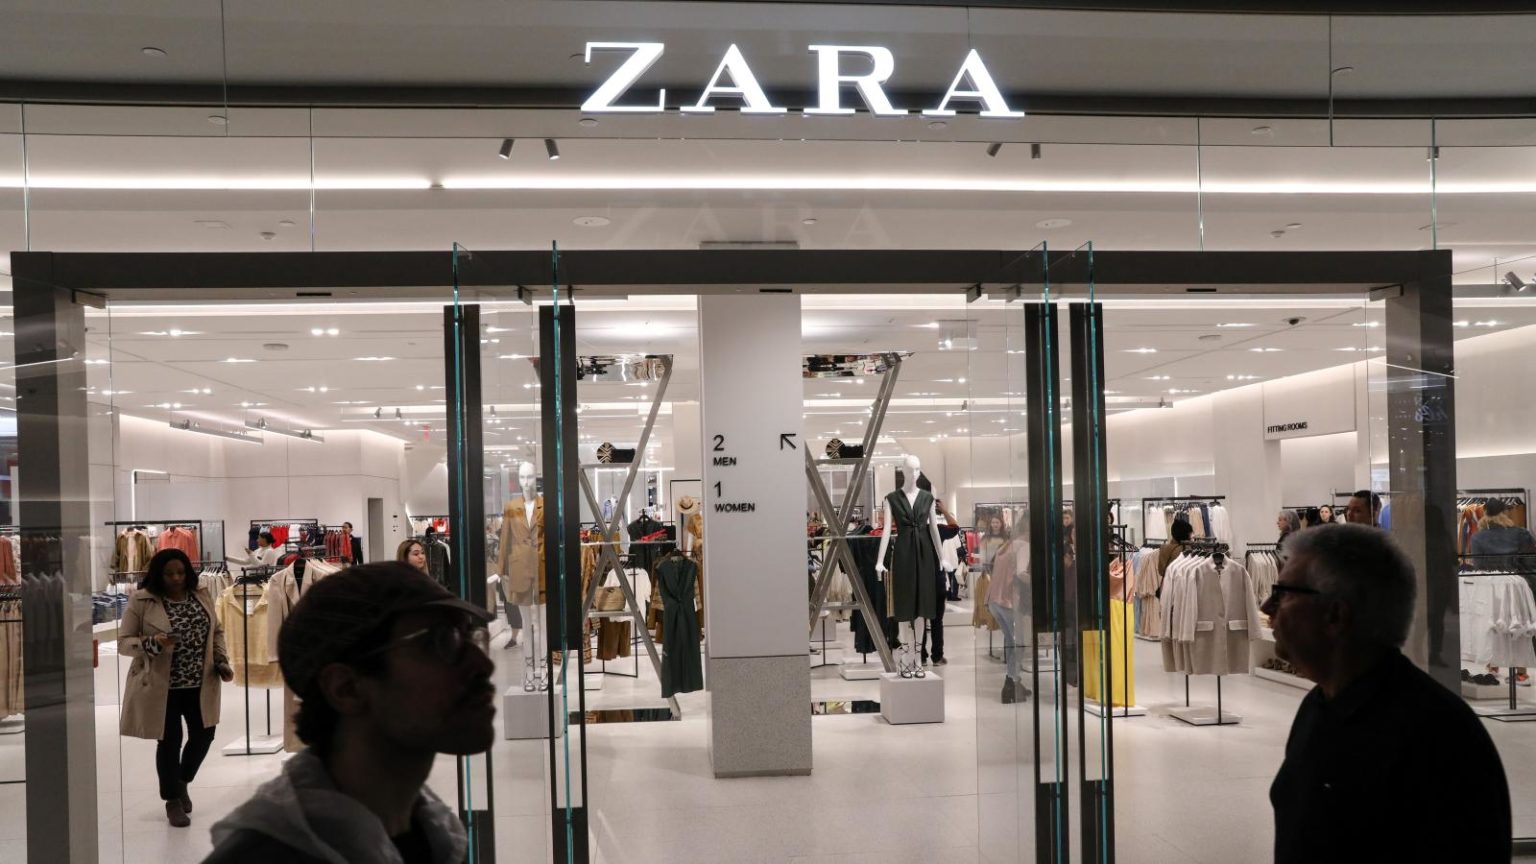 Management of a Project in Zara Assignment